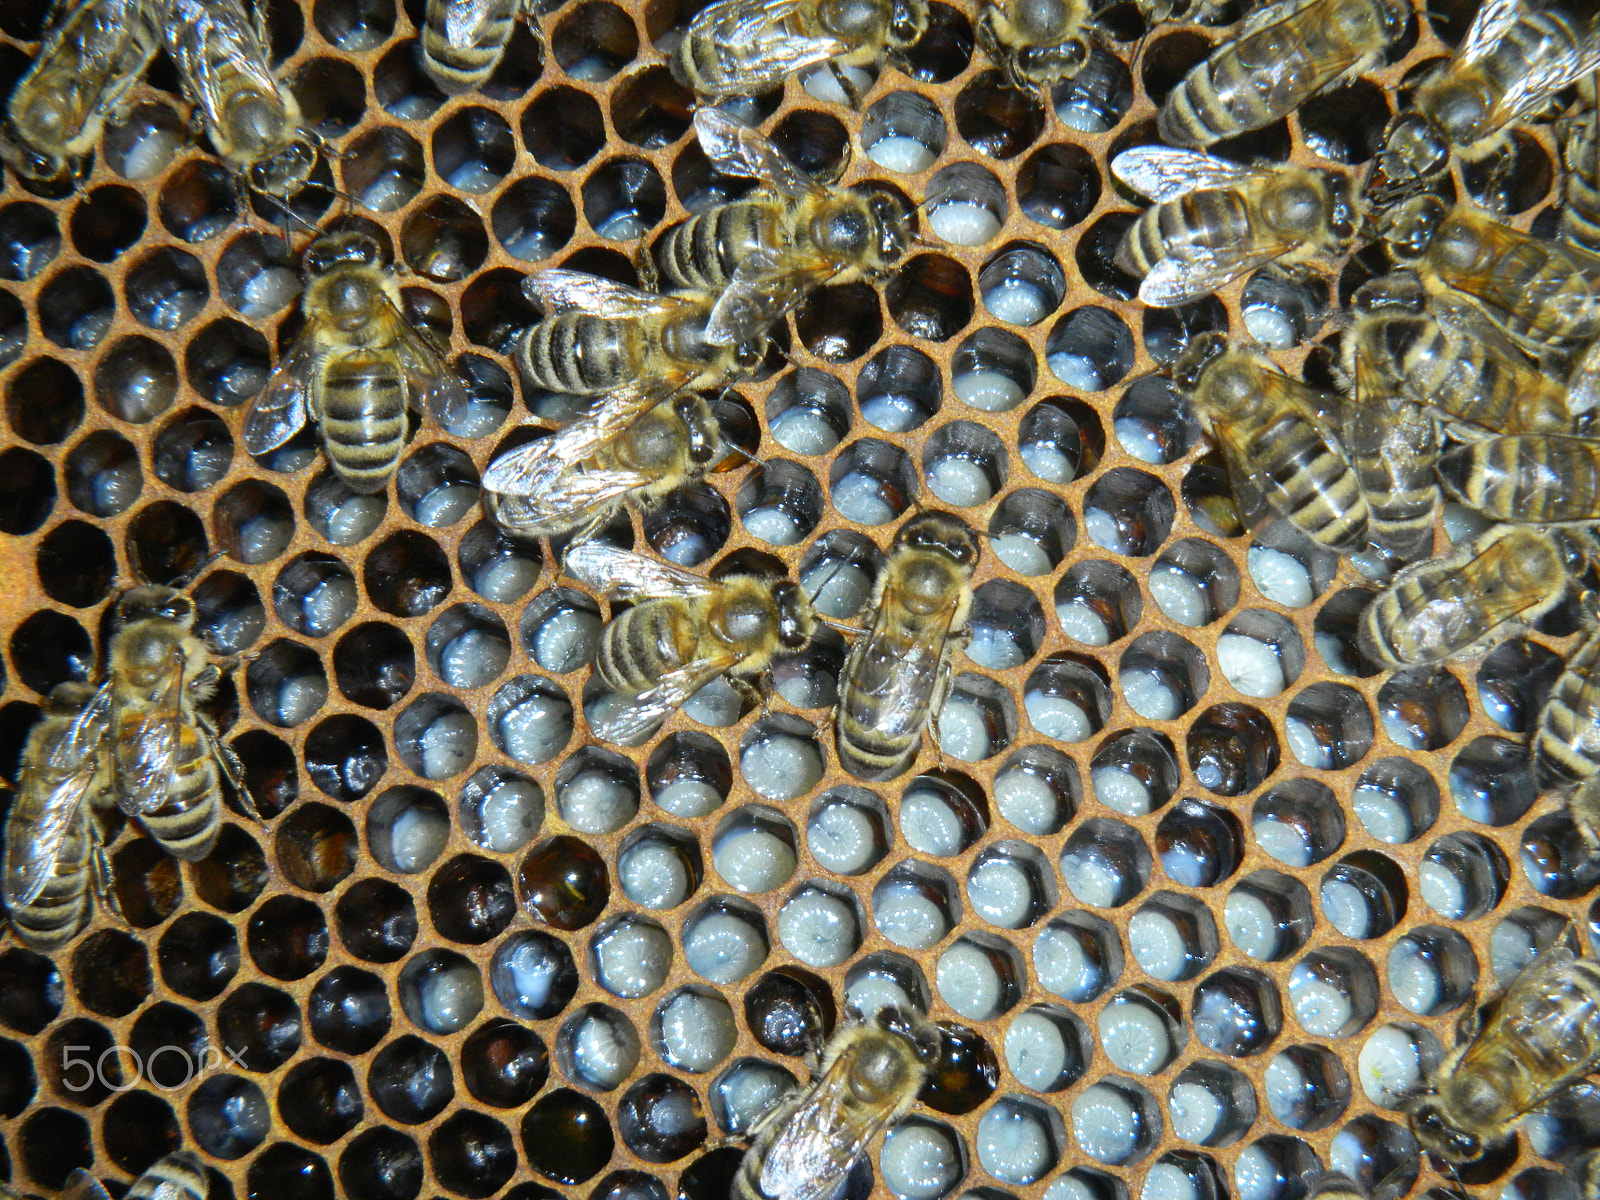 Nikon Coolpix S1100pj sample photo. Bees on the honeycomb with larvae photography